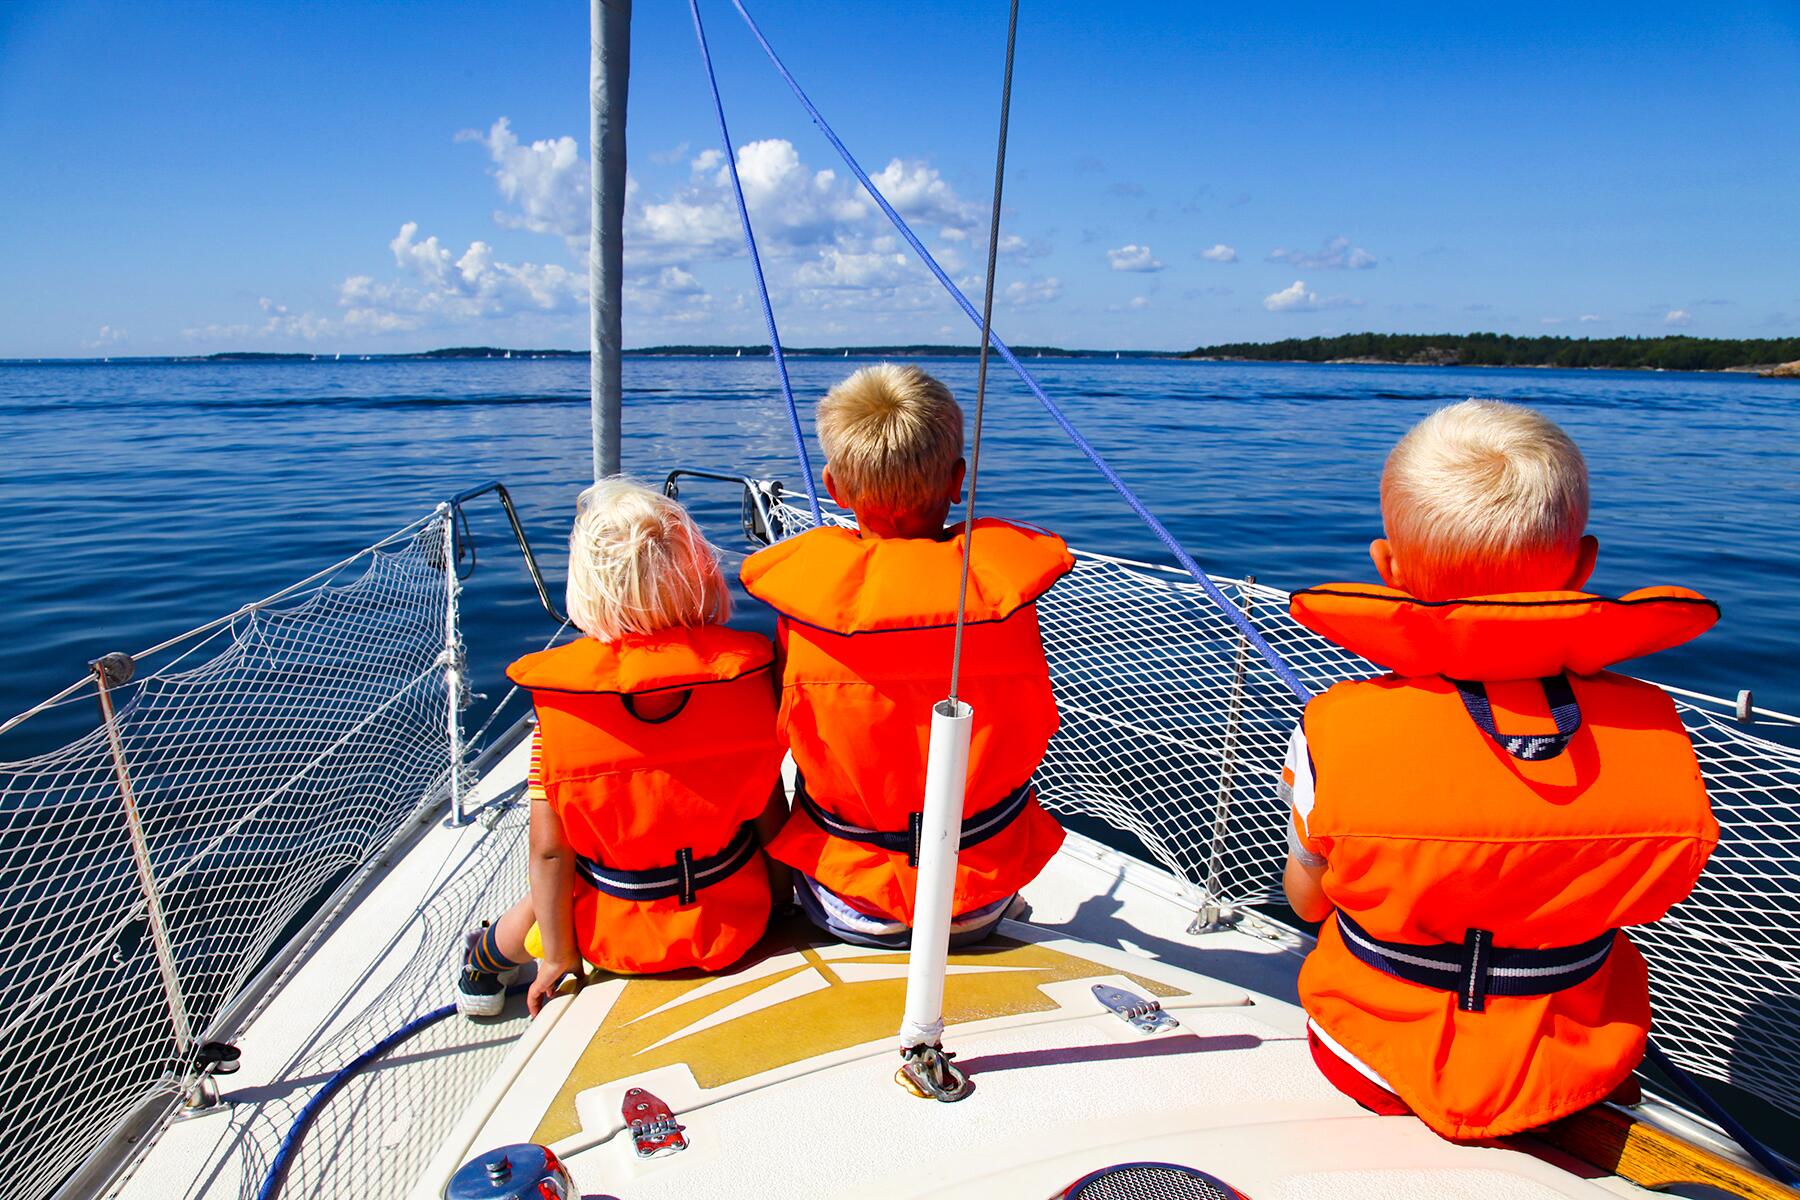 Essential Tips for Staying Safe on Your Next Boating Trip